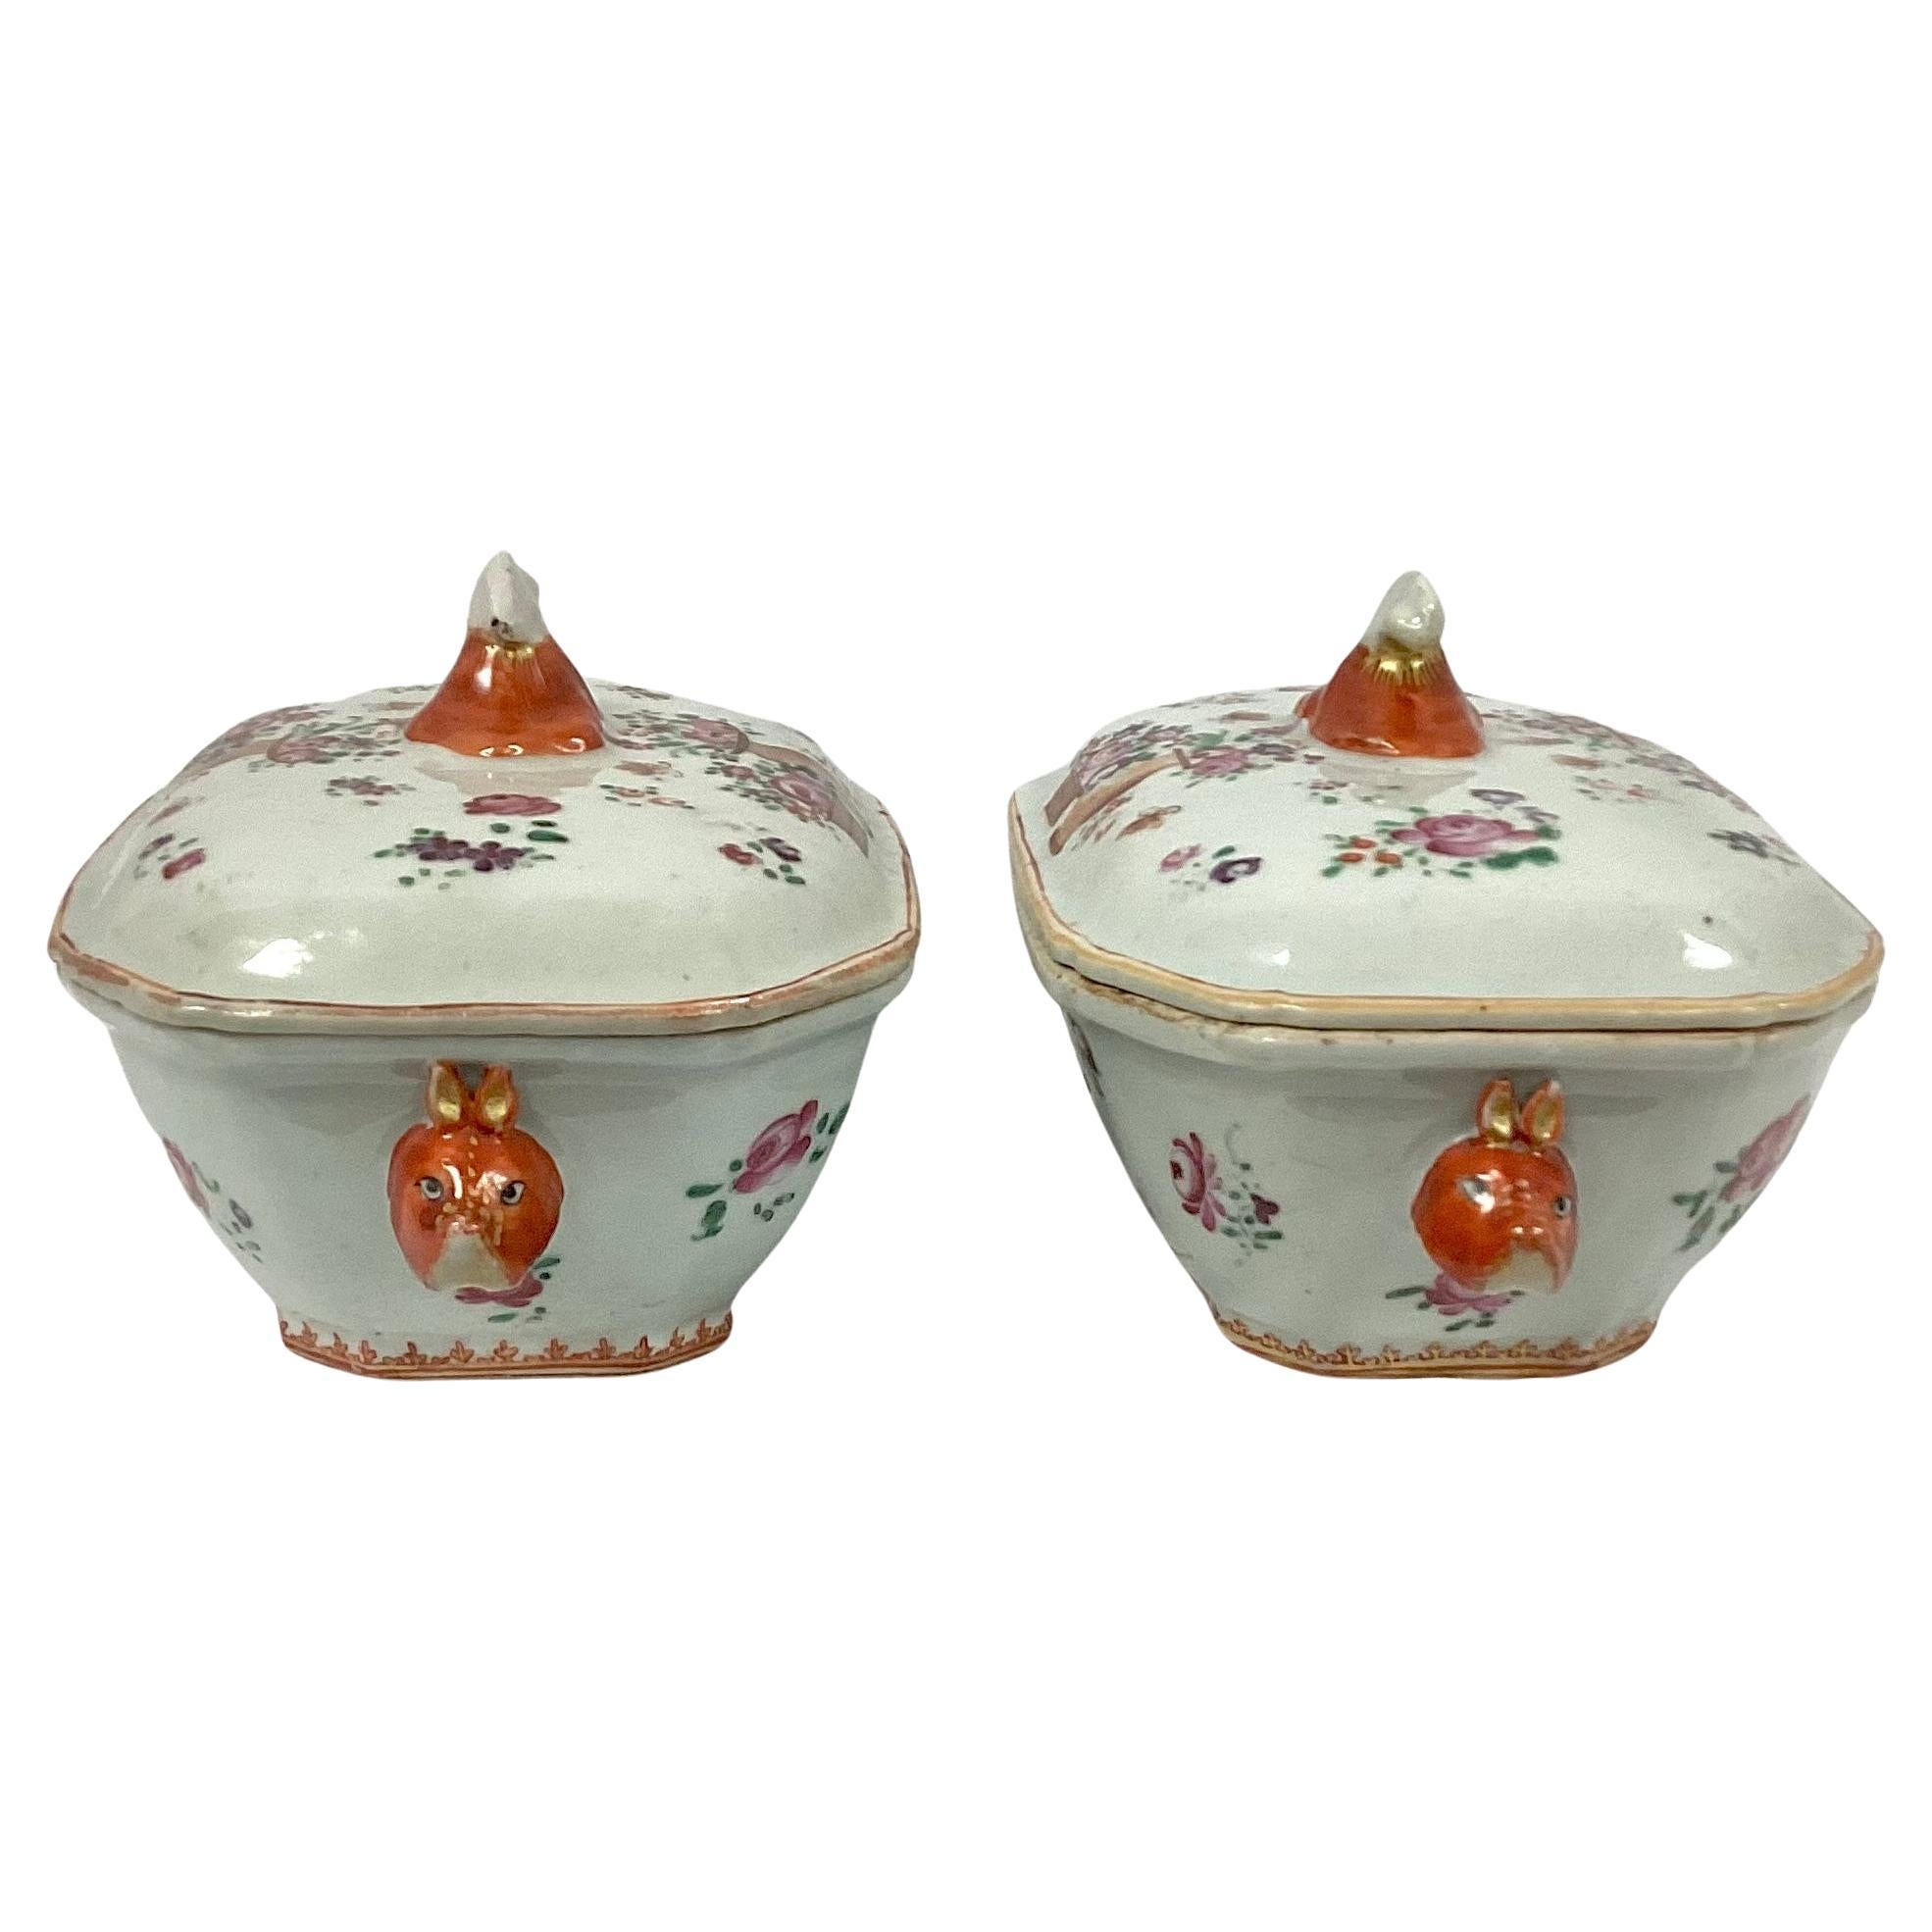 Set of two Chinese export famille rose porcelain tureens. Colors of pink, orange, and brown on a white background. Each tureen has boar's heads as handles on ends.